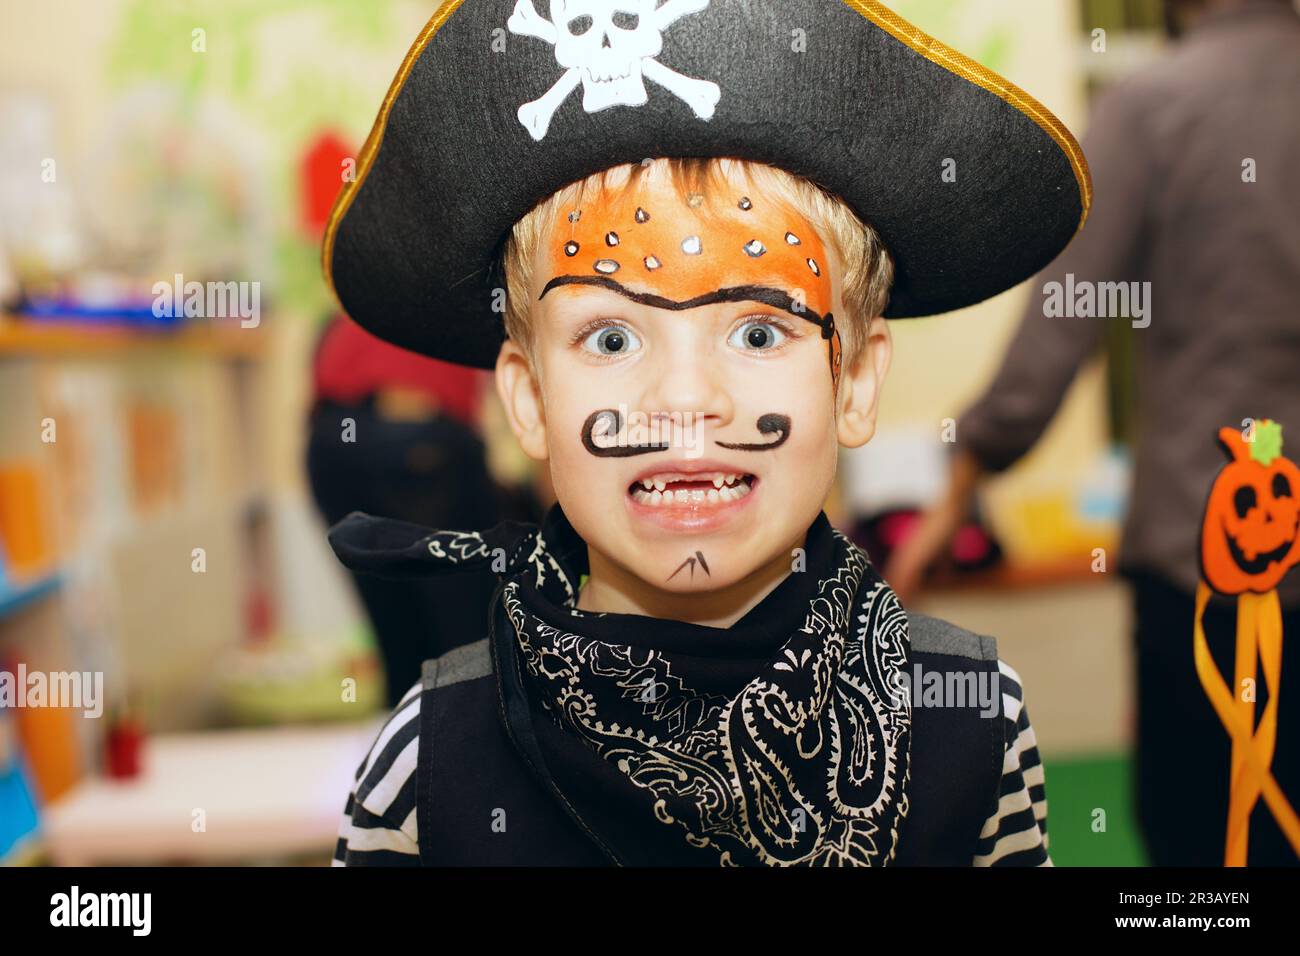 Halloween party. A little boy in a pirate costume and a makeup on his face is having a good time at Stock Photo